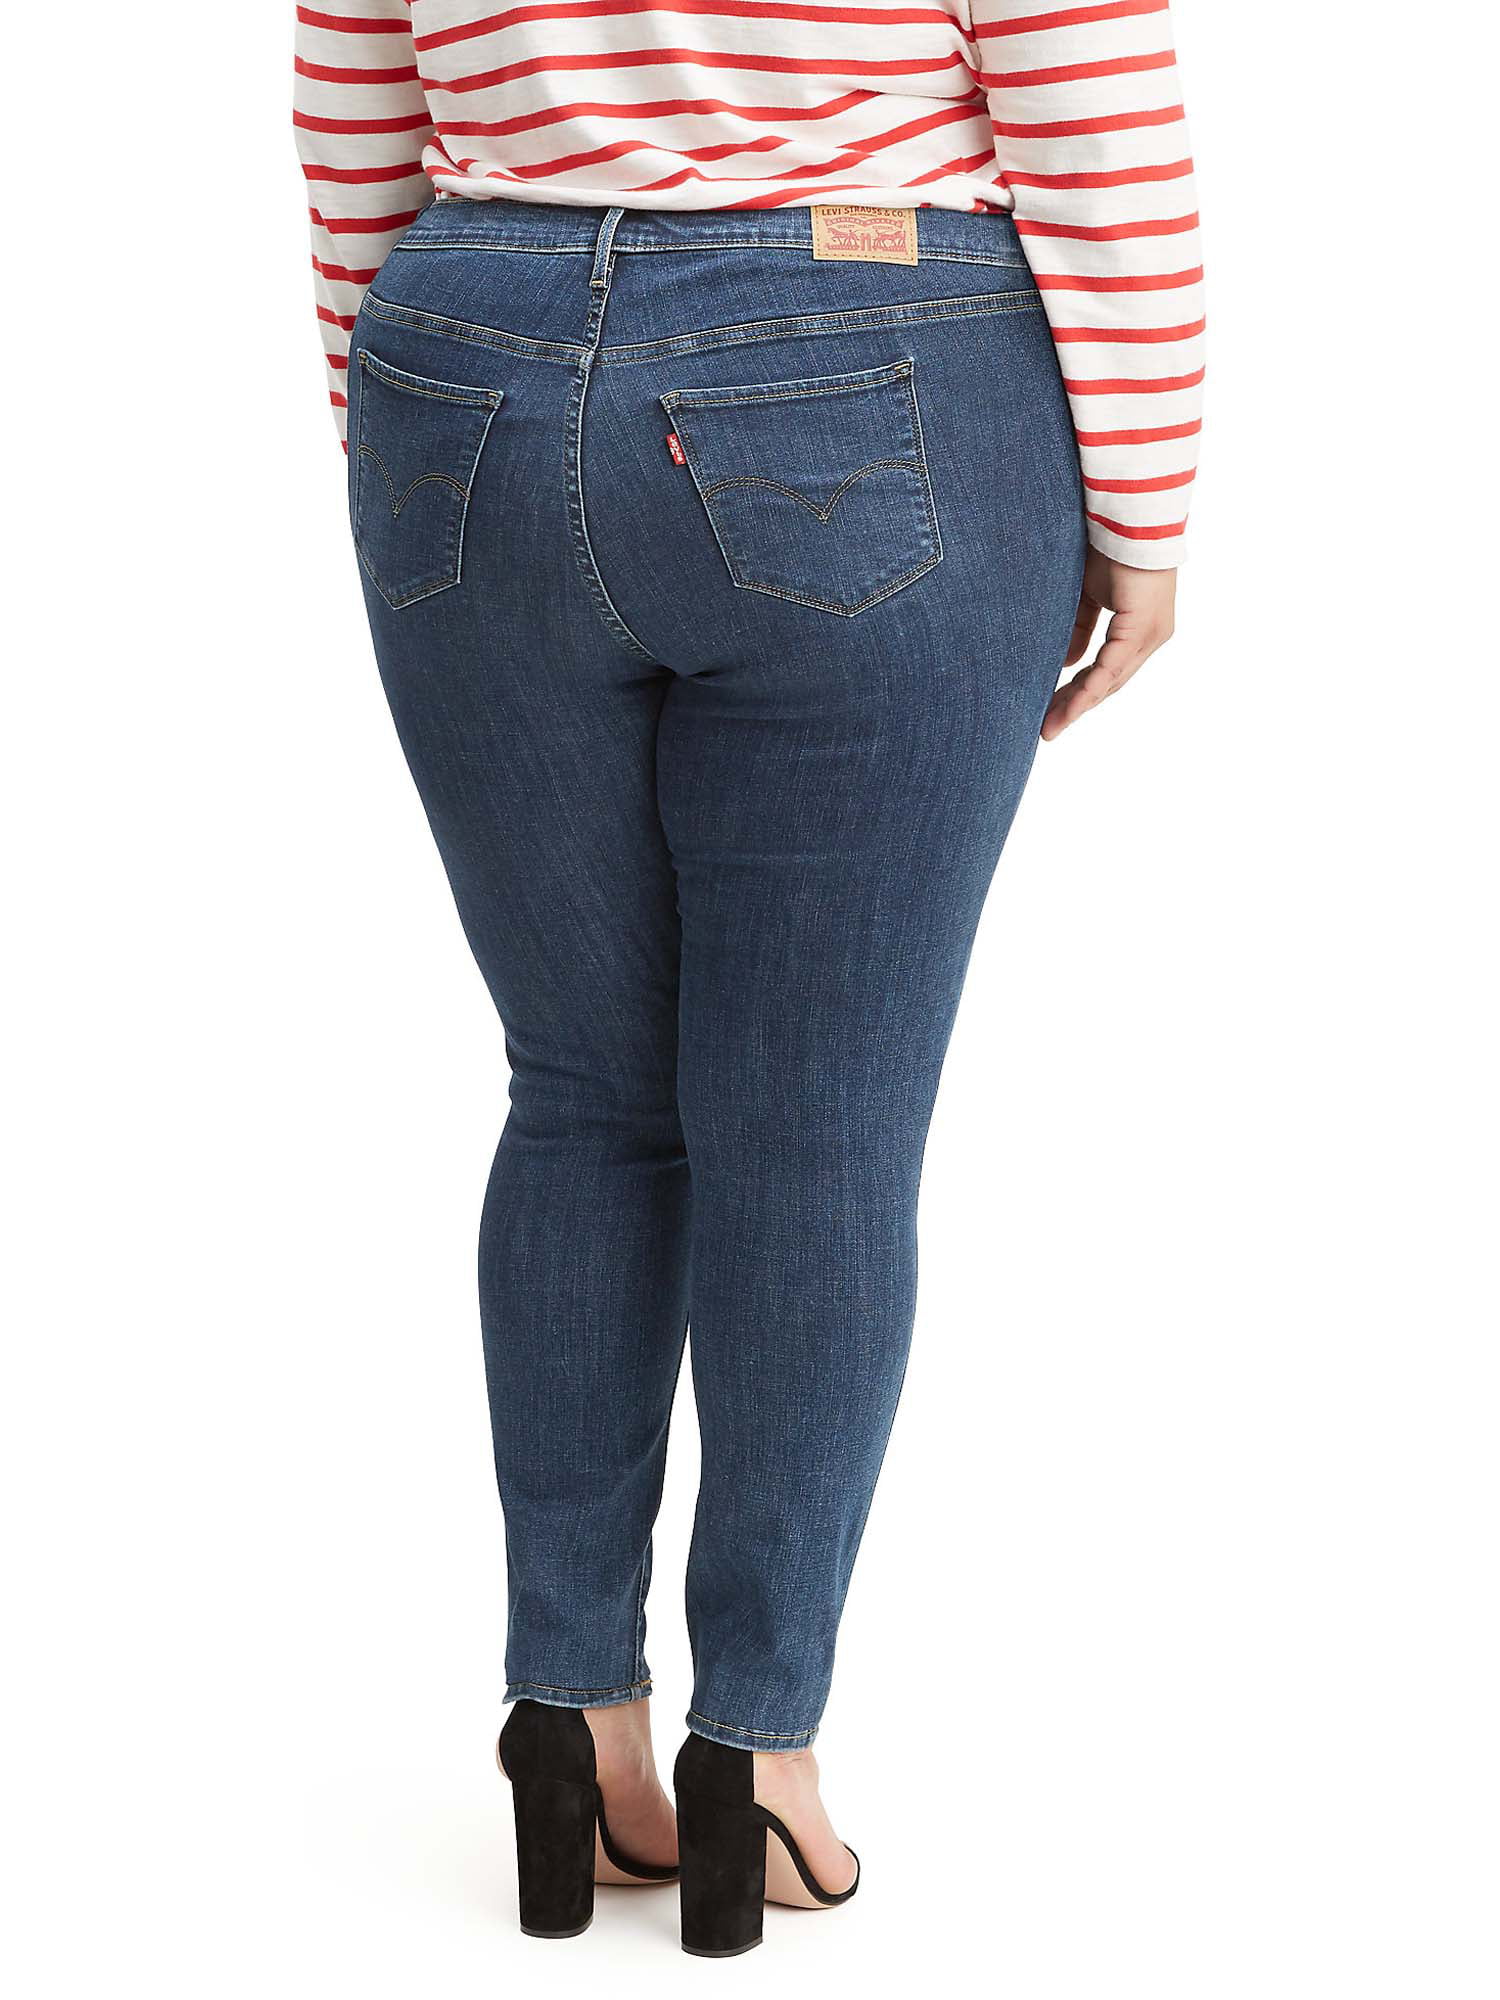 Levis Women's Plus Size 711 Stretch Mid Rise Skinny Jeans 